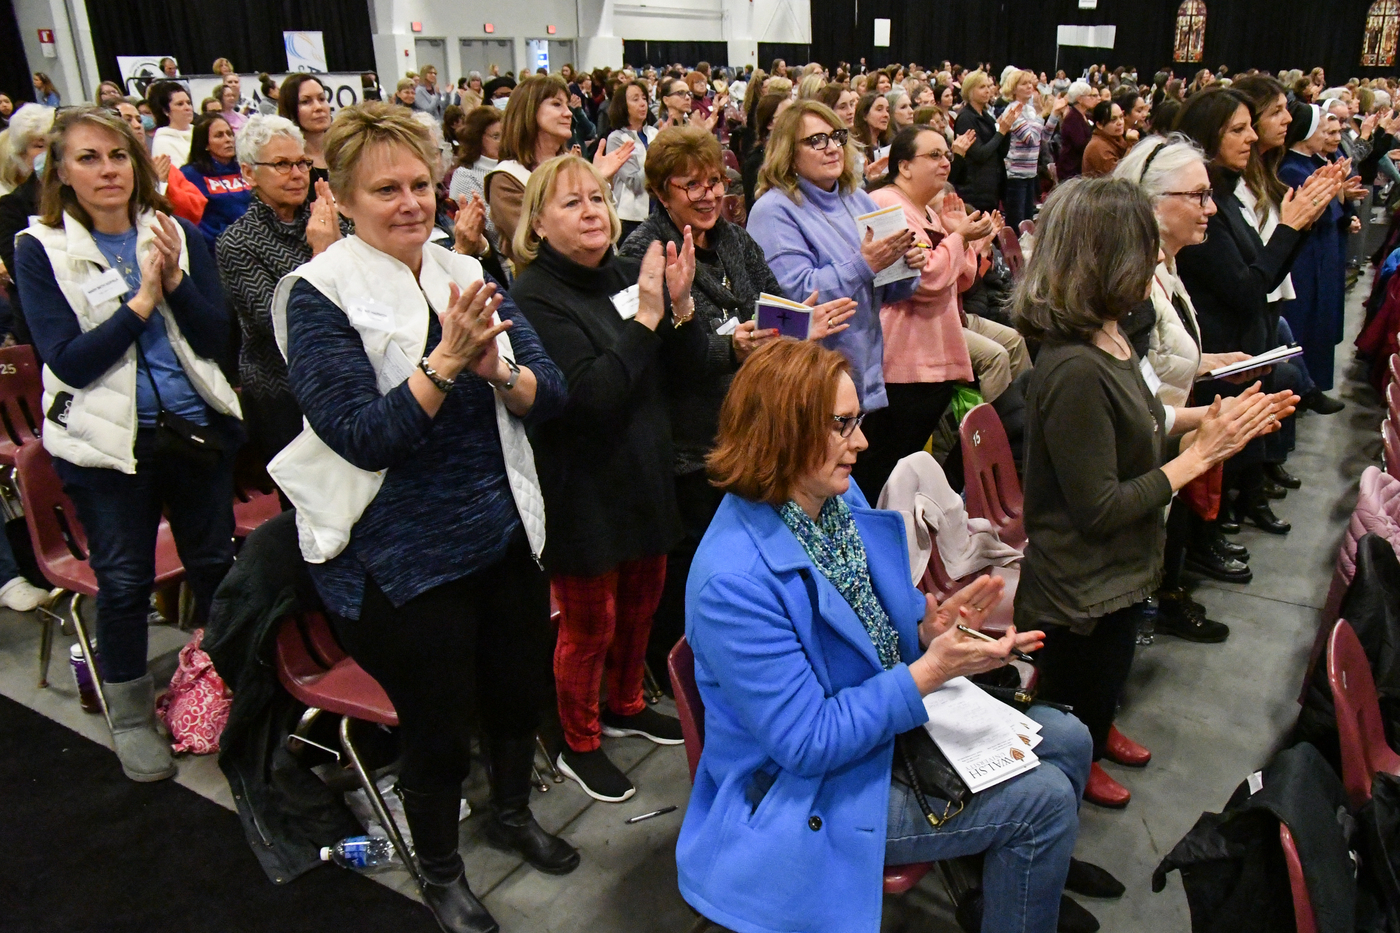 Women’s conference returns after year’s absence Catholic Times Read